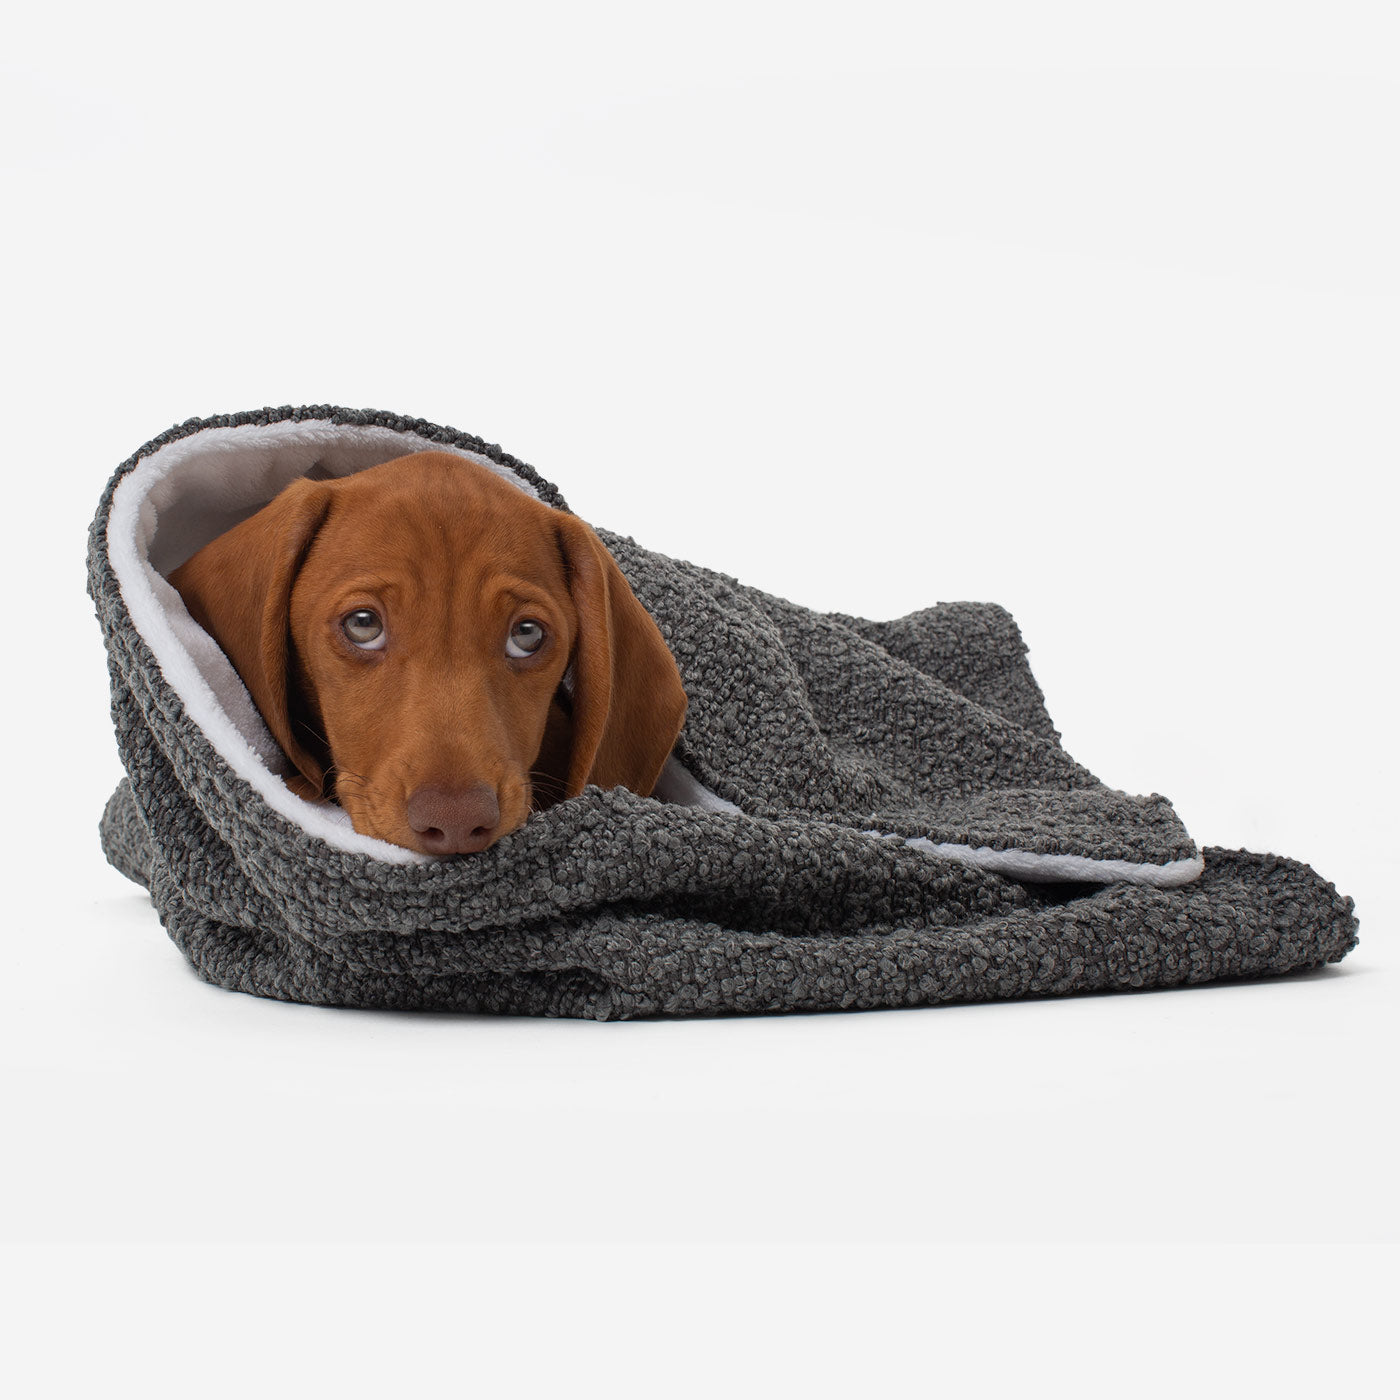 Discover Our Luxurious Dog Blanket In Luxury Granite Bouclé Super Soft Sherpa & Teddy Fleece Lining, The Perfect Blanket For Puppies, Available To Personalize And In 2 Sizes Here at Lords & Labradors US